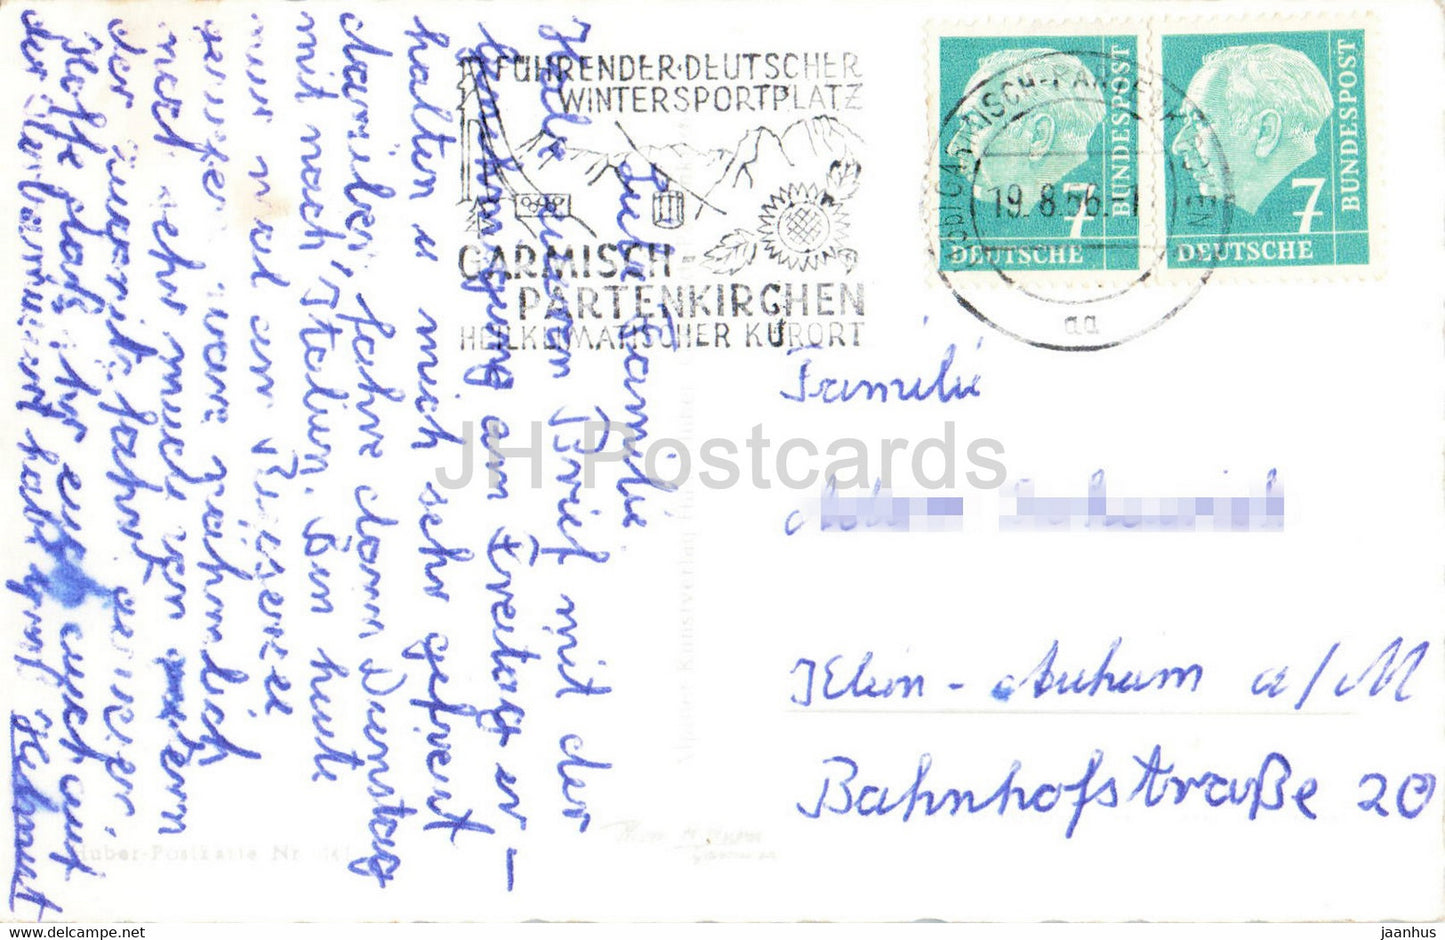 Riessersee gegen Zugspitzgruppe - old postcard - 1956 - Germany - used